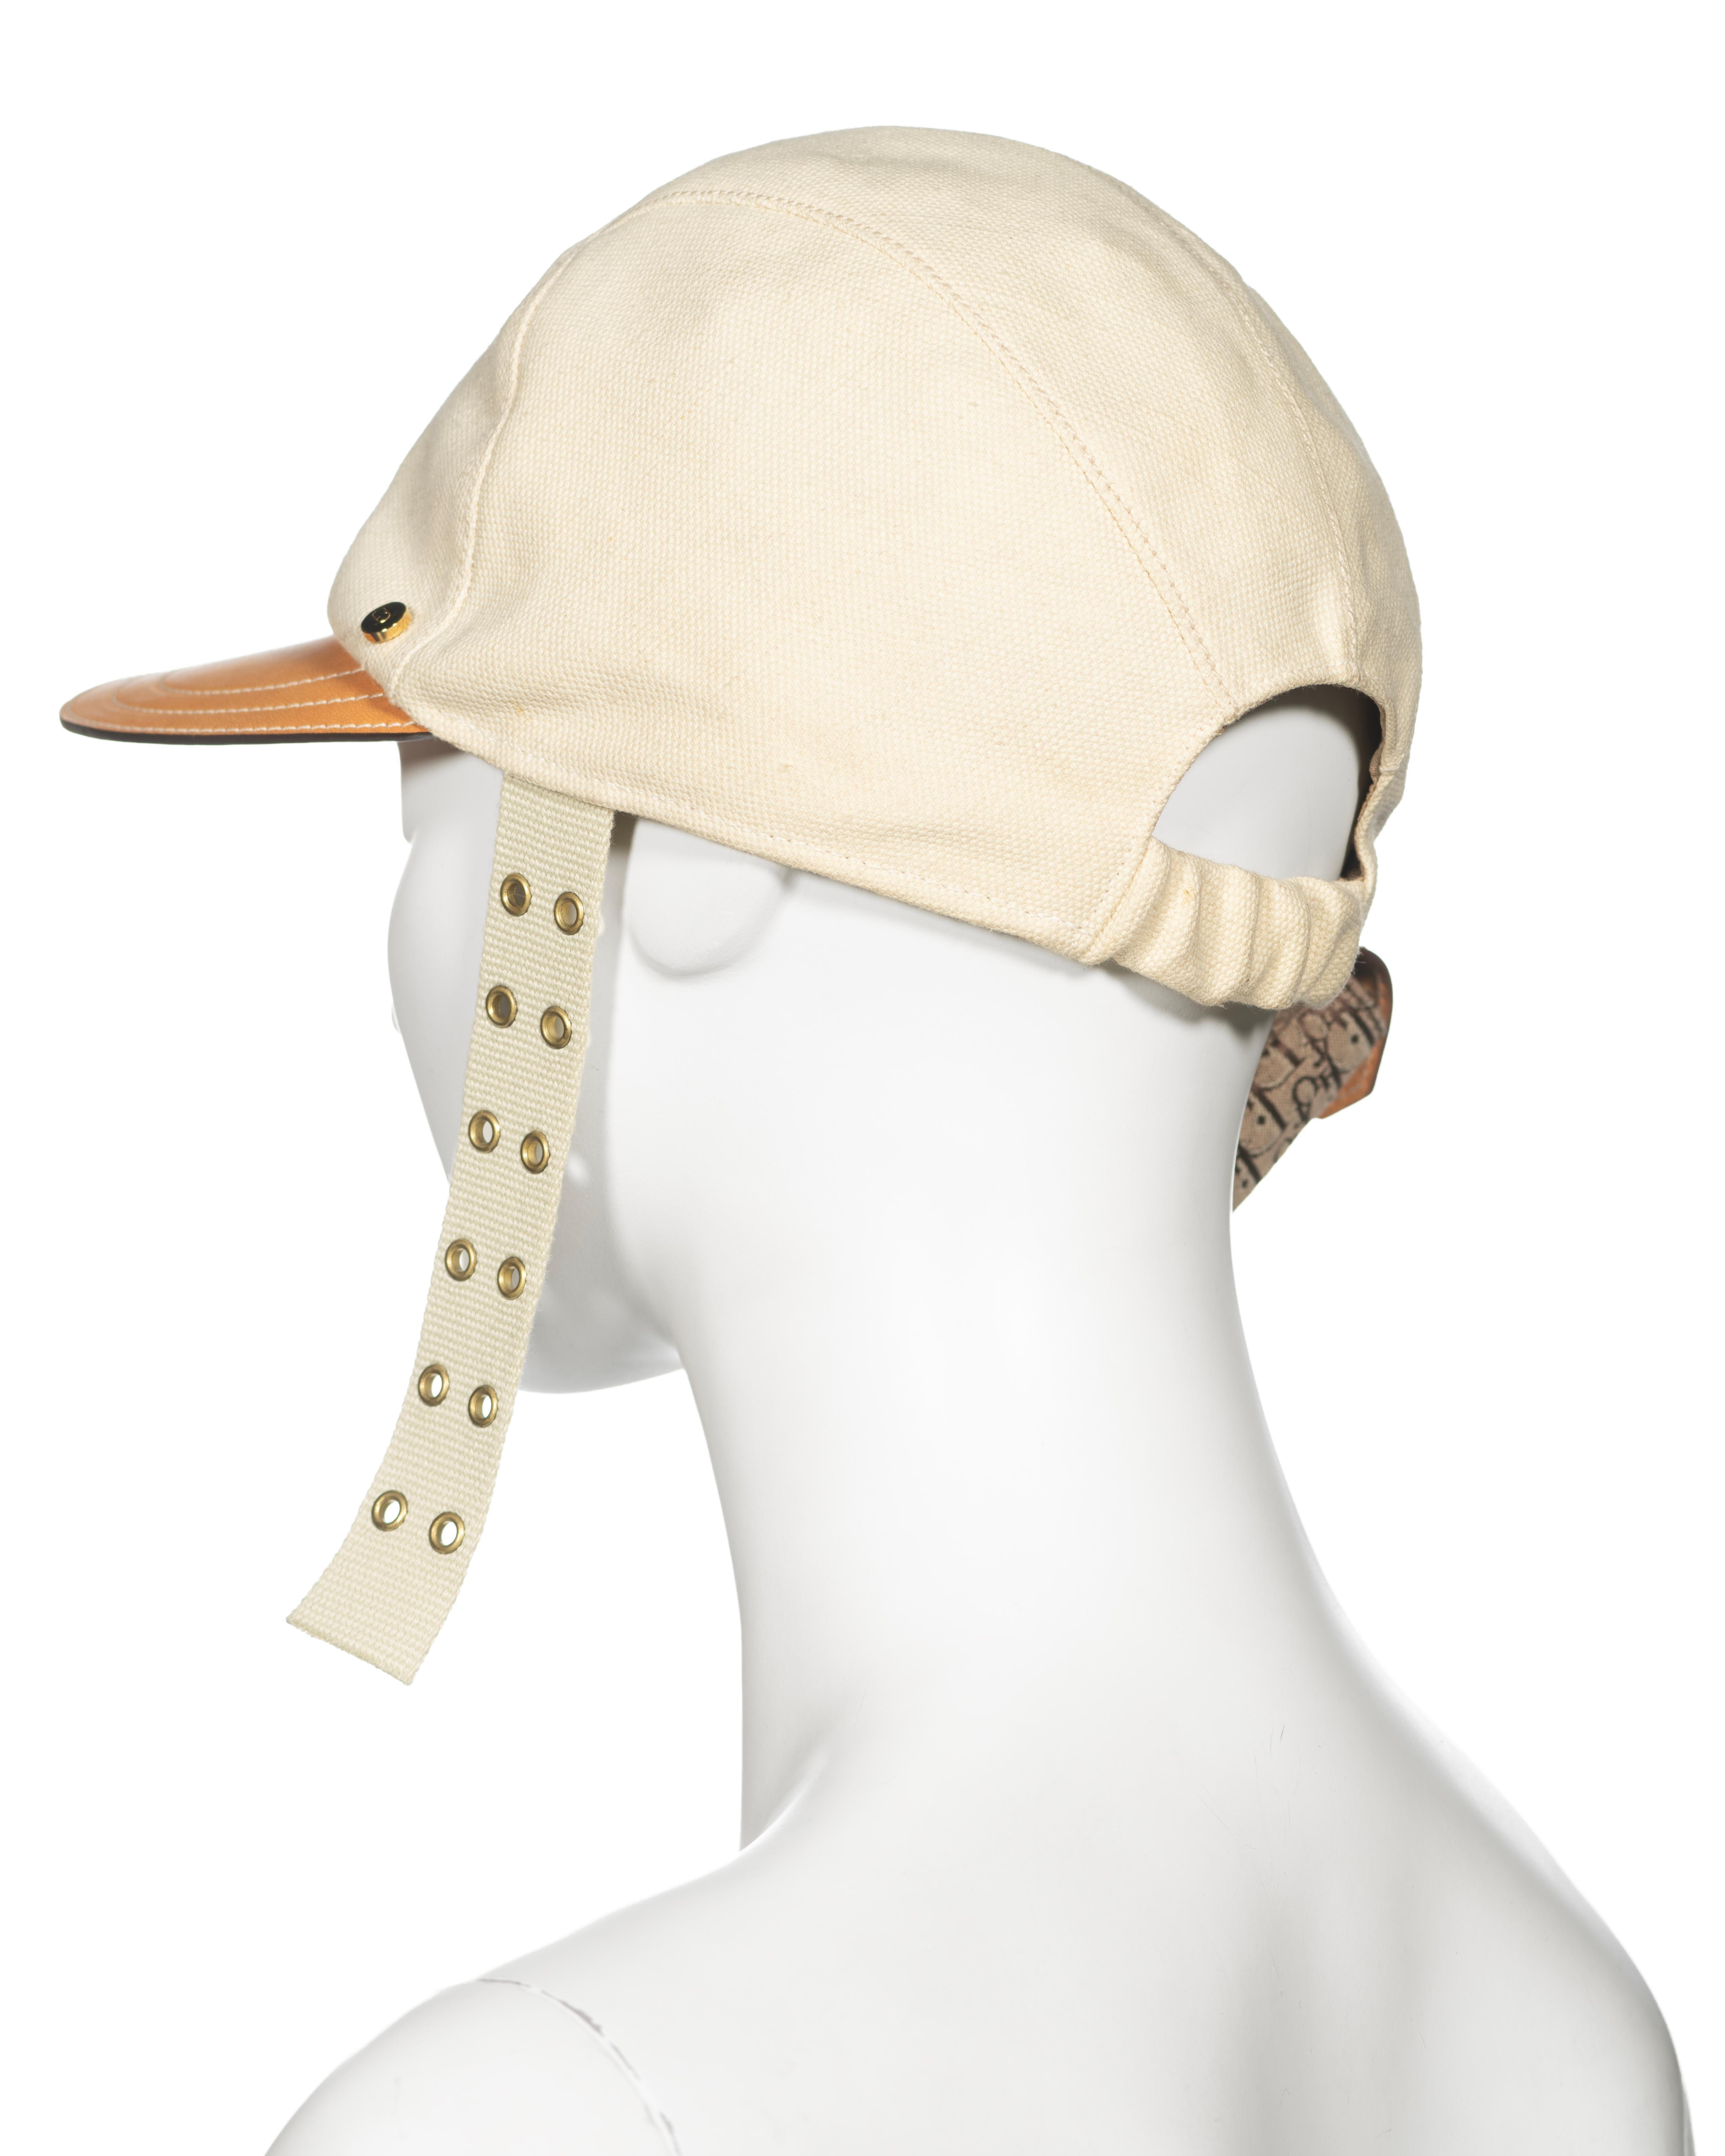 Christian Dior by John Galliano Canvas and Leather Cap with Pouch, ss 2002 For Sale 8